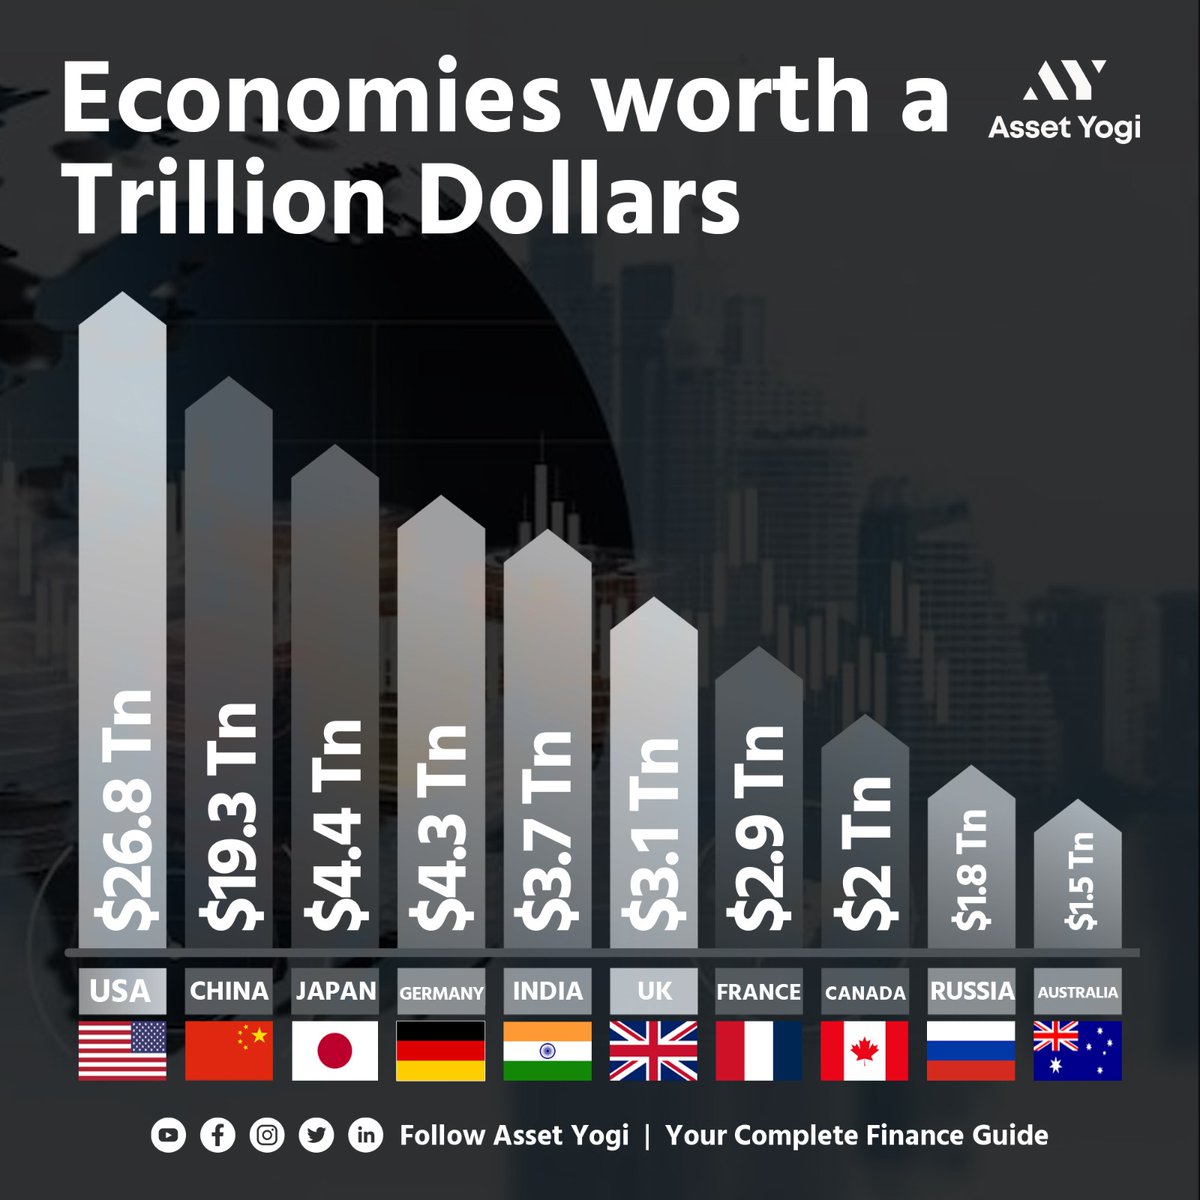 Can we expect India to become a $5 trillion economy in the next few years?
.
.
#economicgrowth #India #gdpgrowth